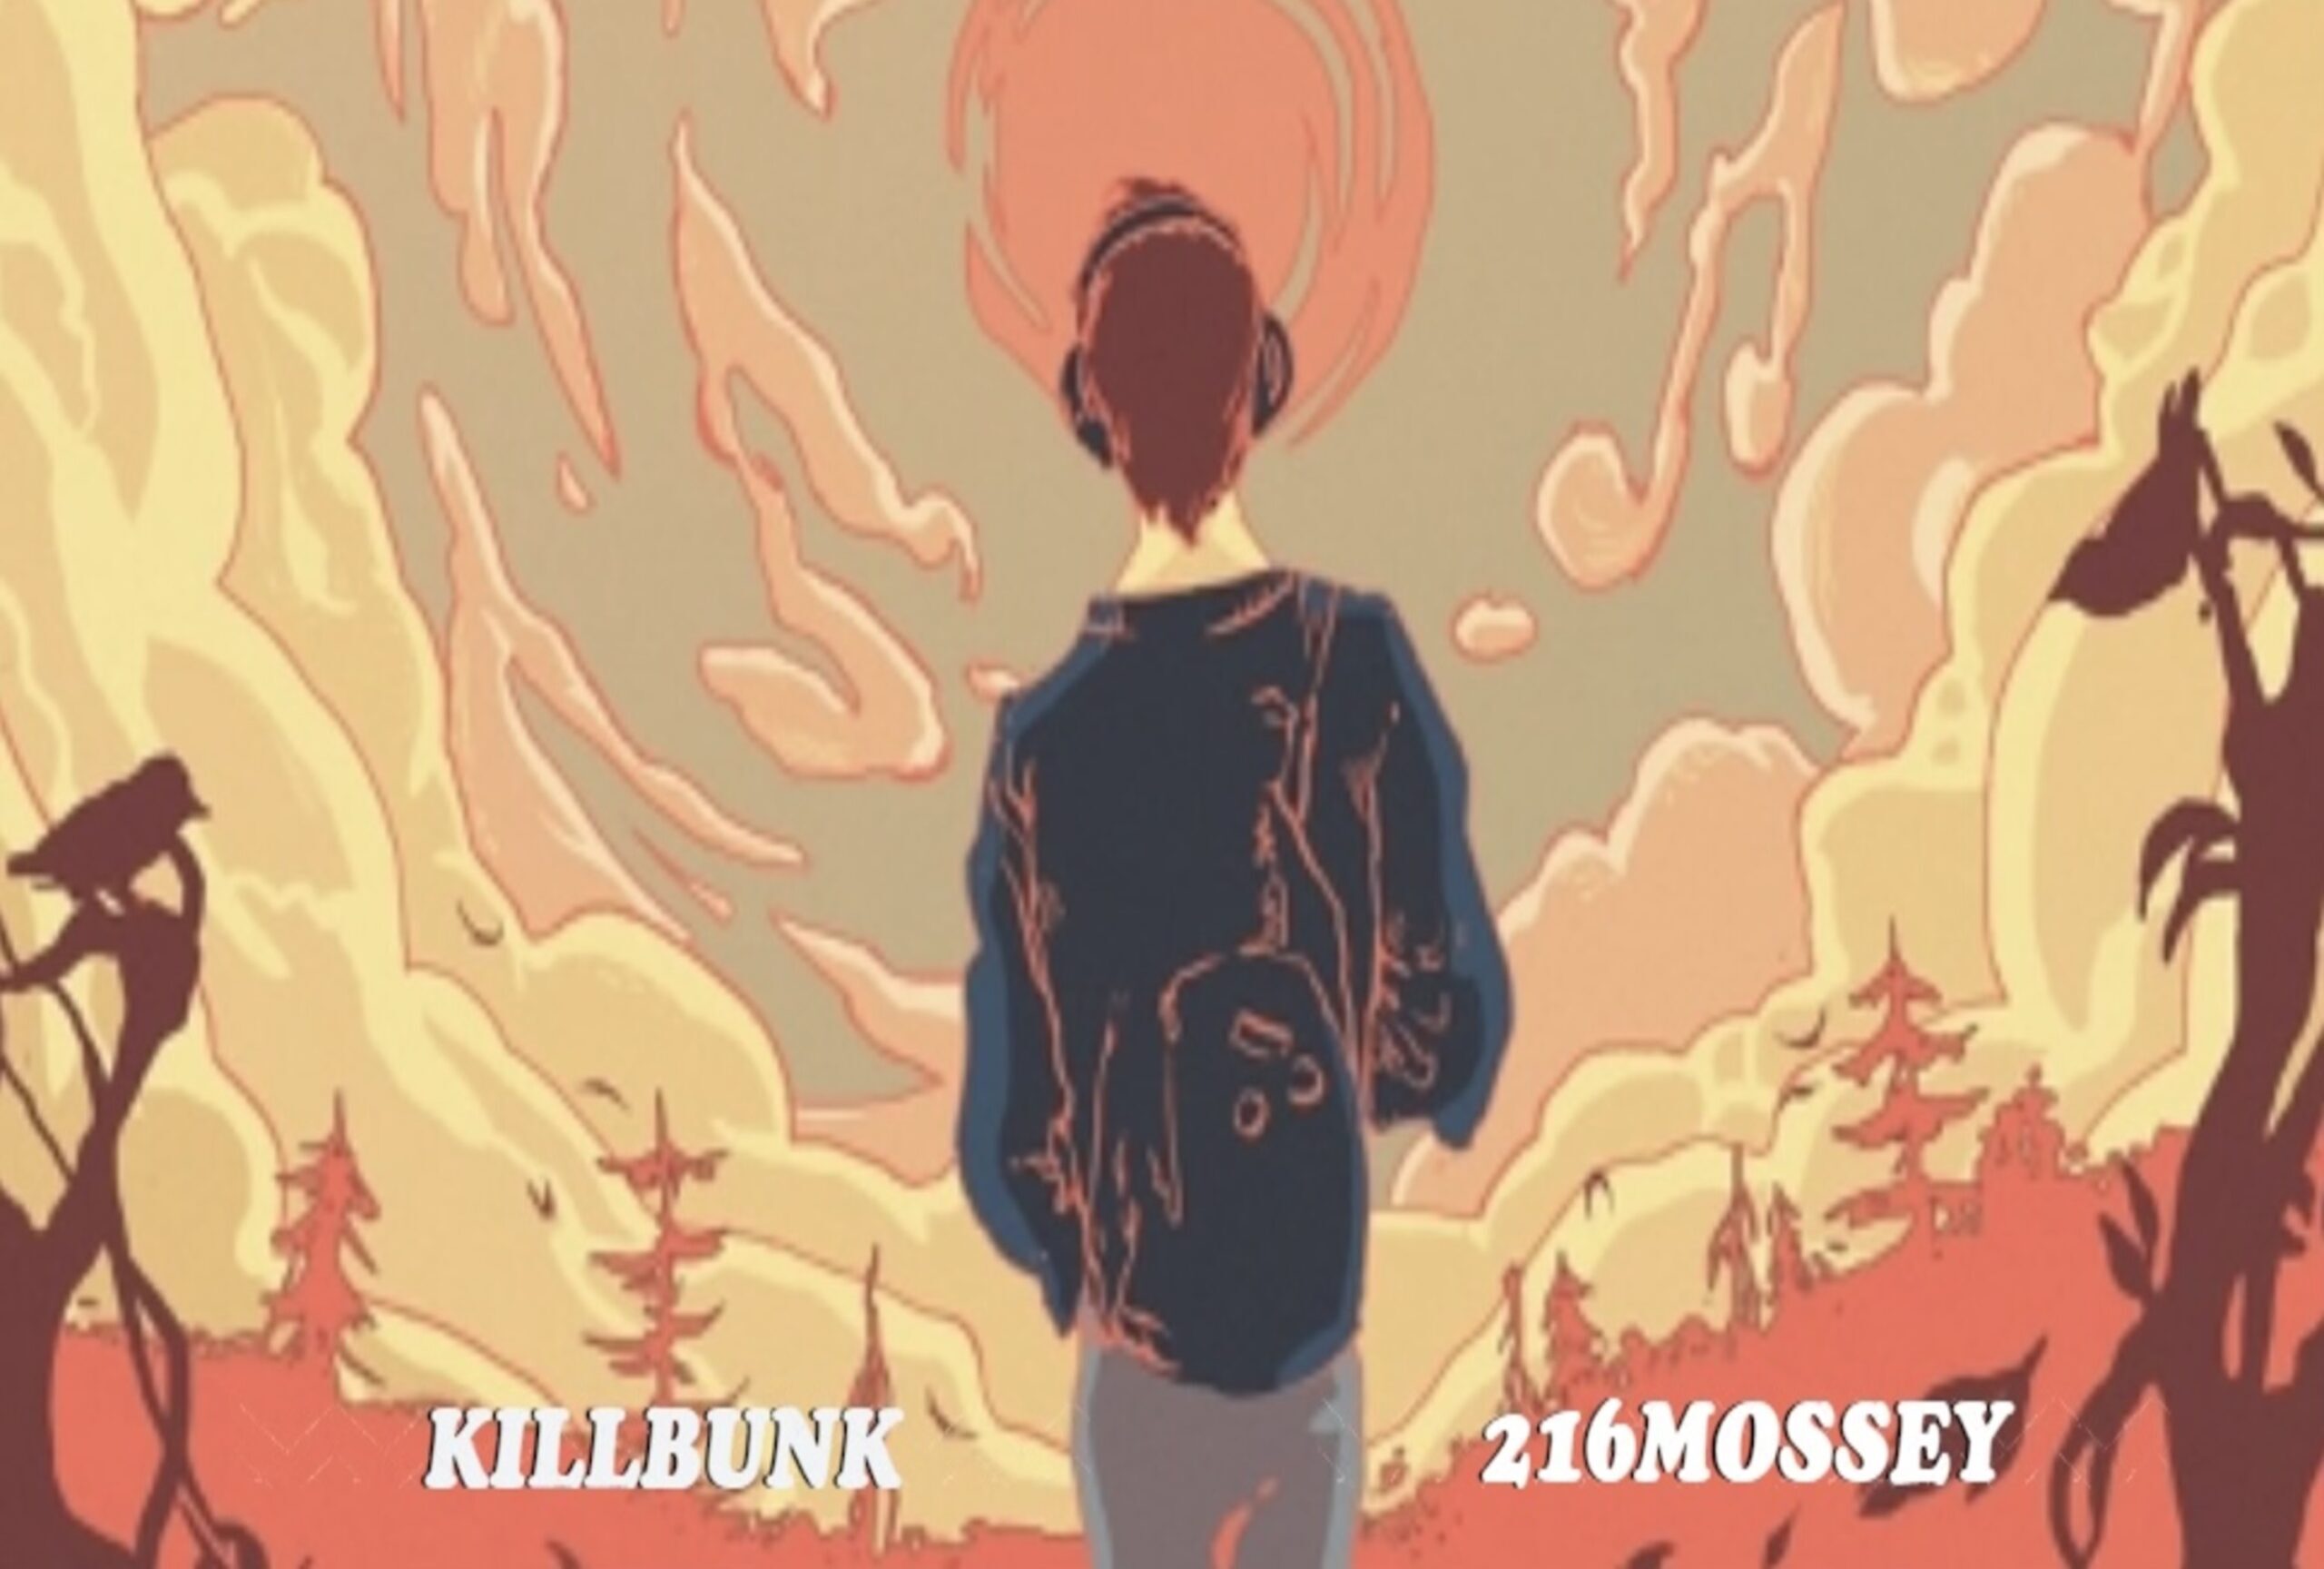 216mossey Releases "Soul Revive" With Killbunk